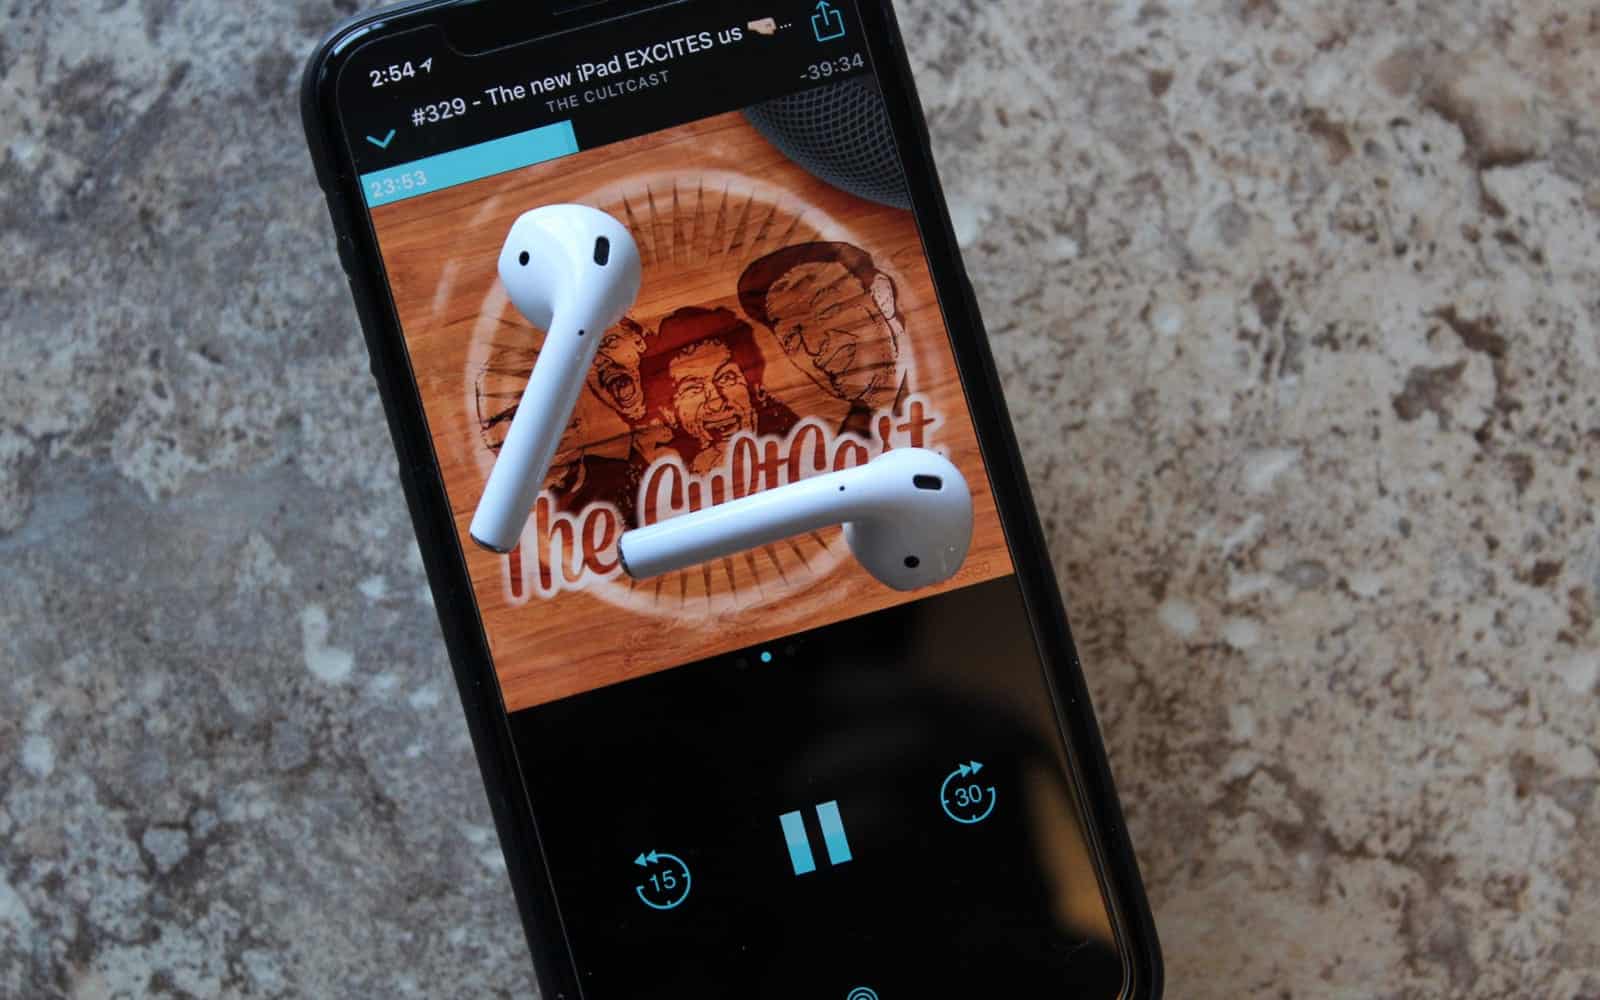 How To Listen To A Podcast On IPhone